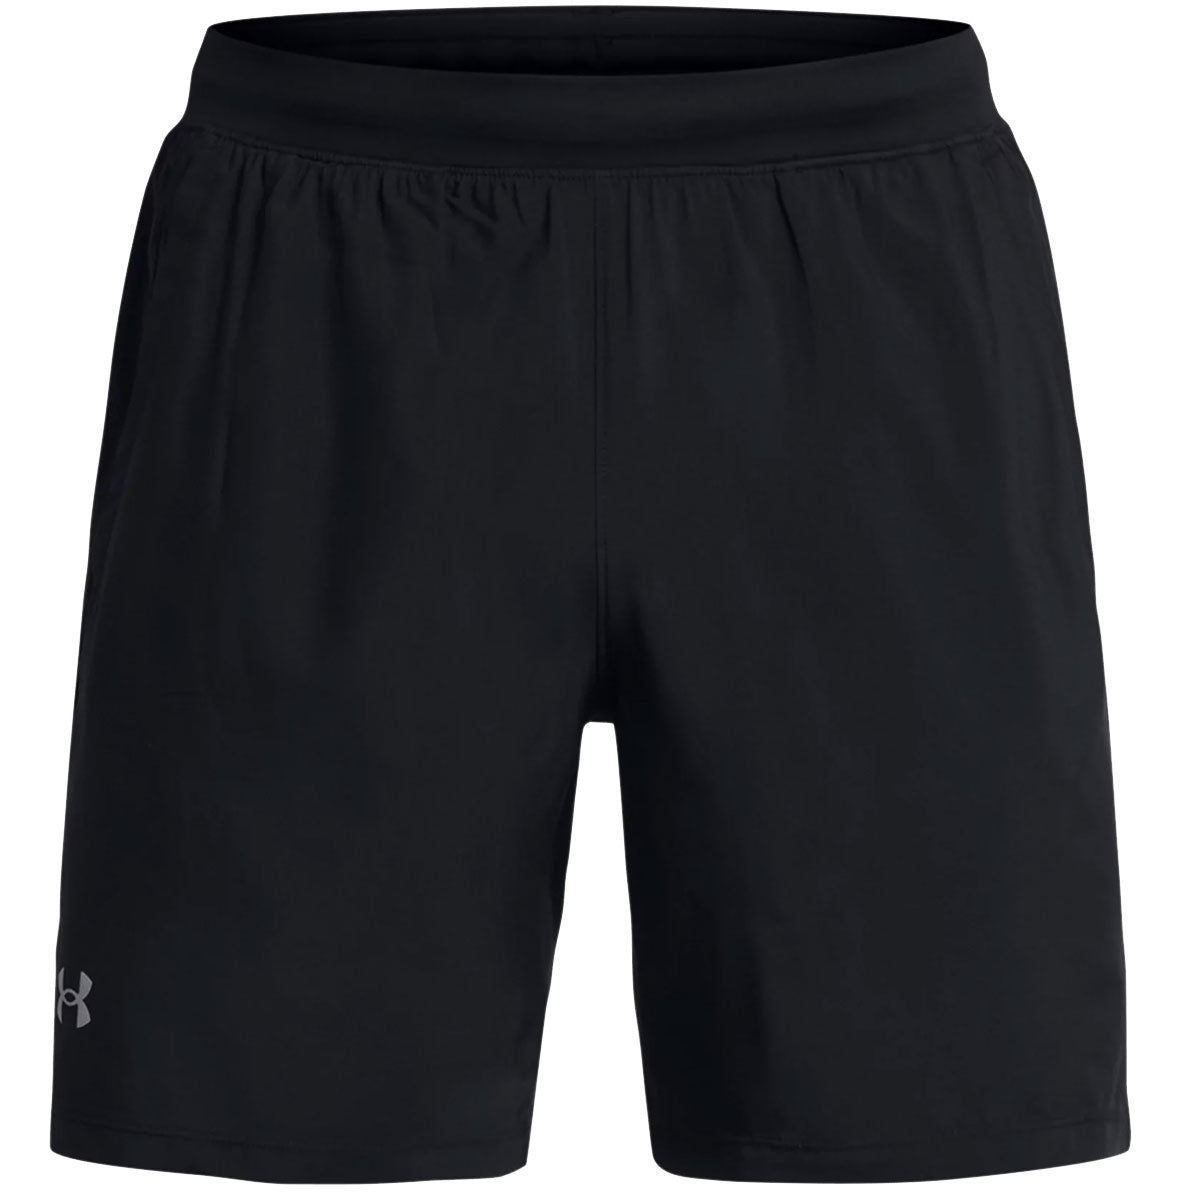 Under Armour Launch 7 inch Running Shorts - Mens - Black/Reflective